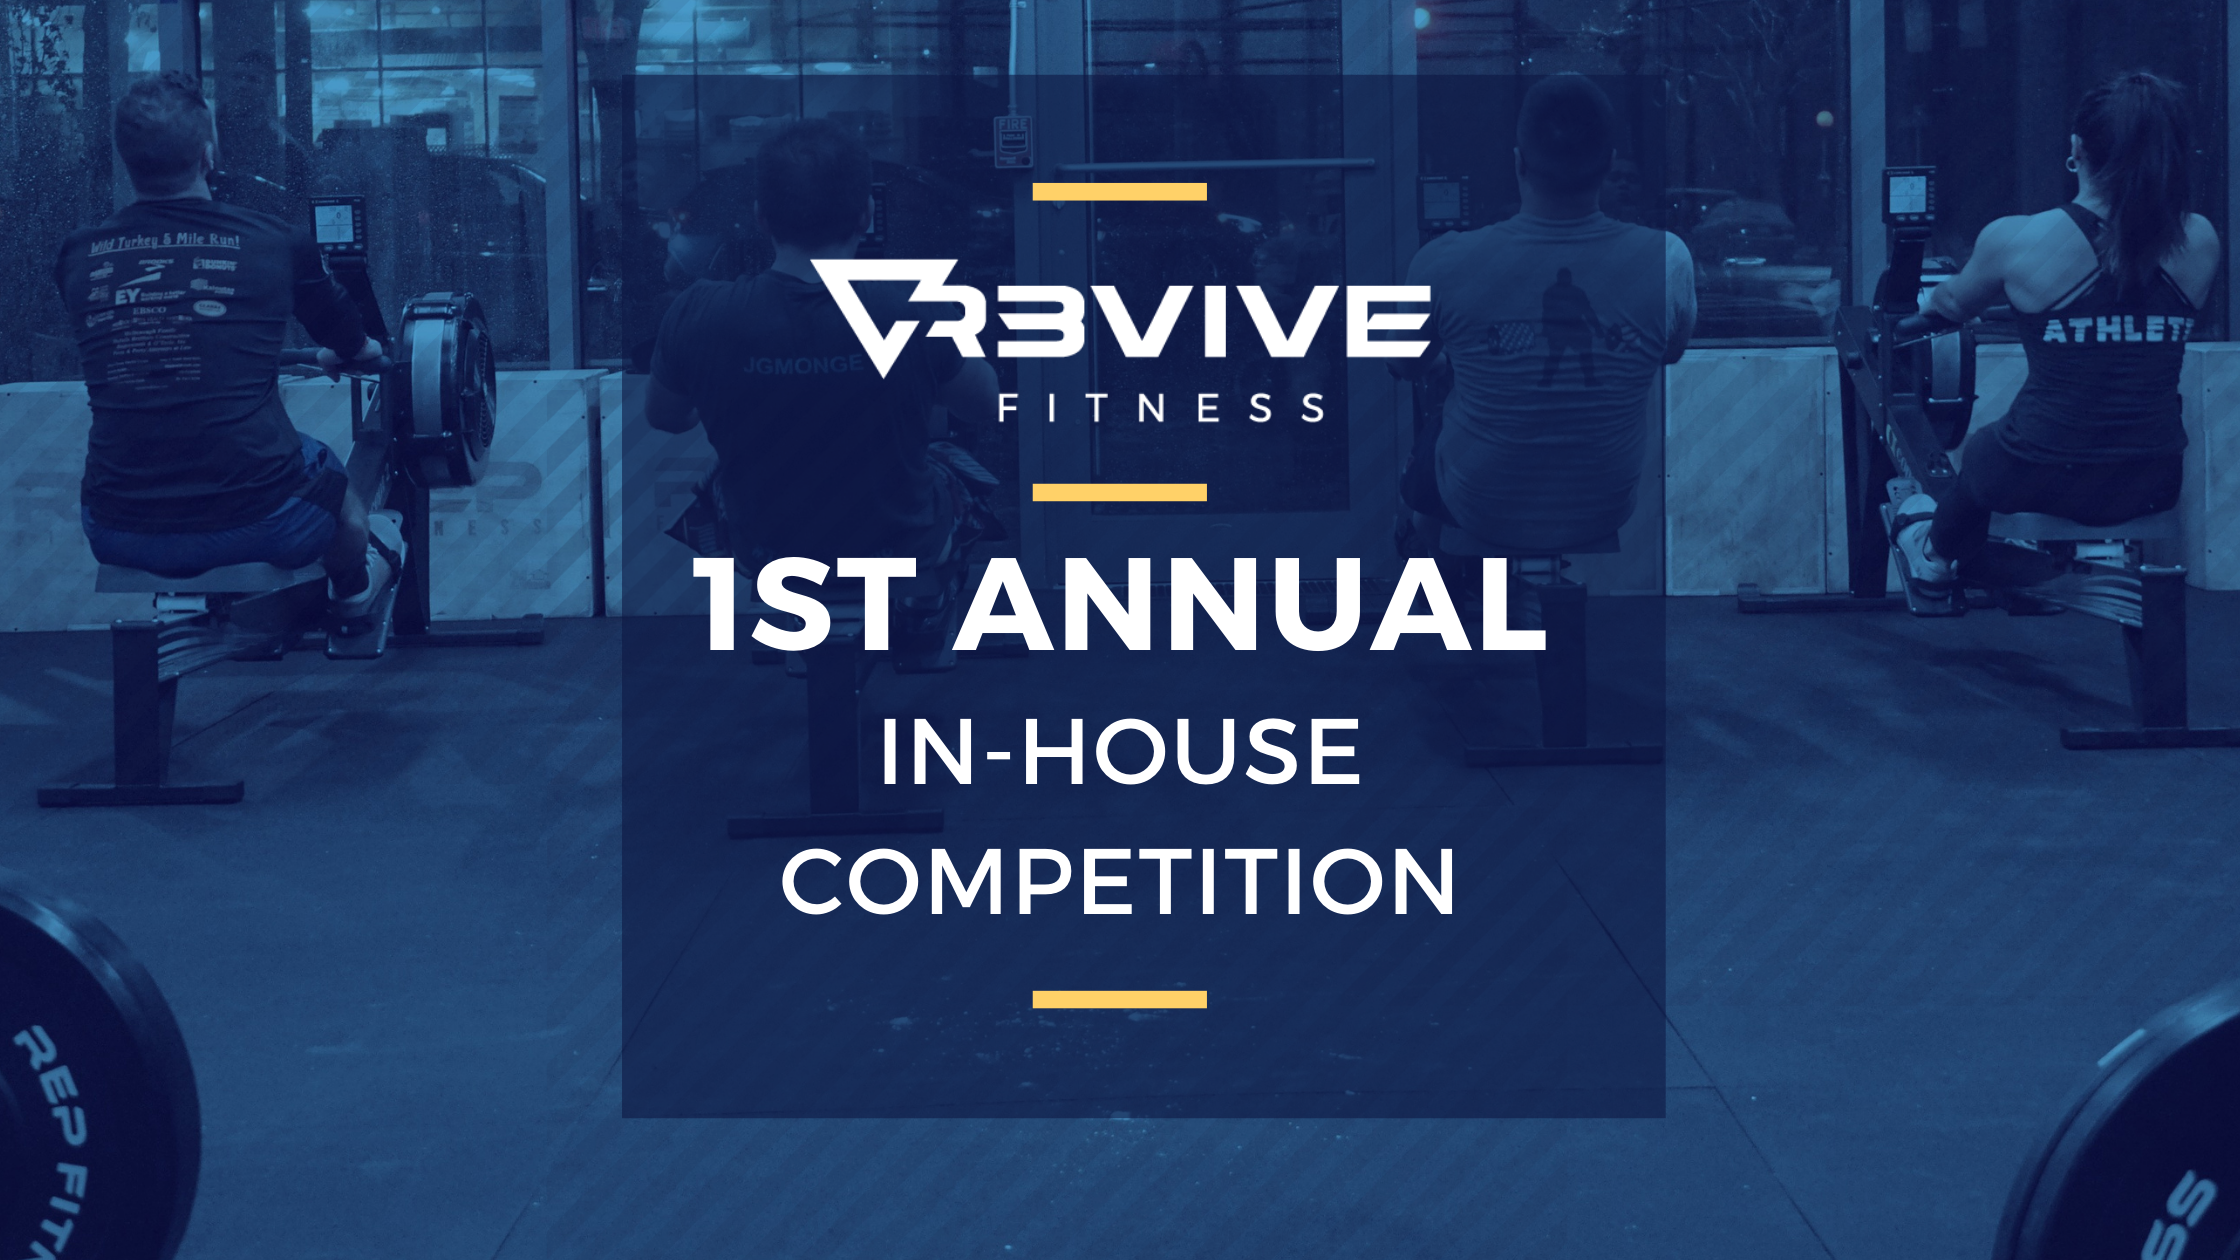 R3VIVE'S 1st Annual, in-house competition